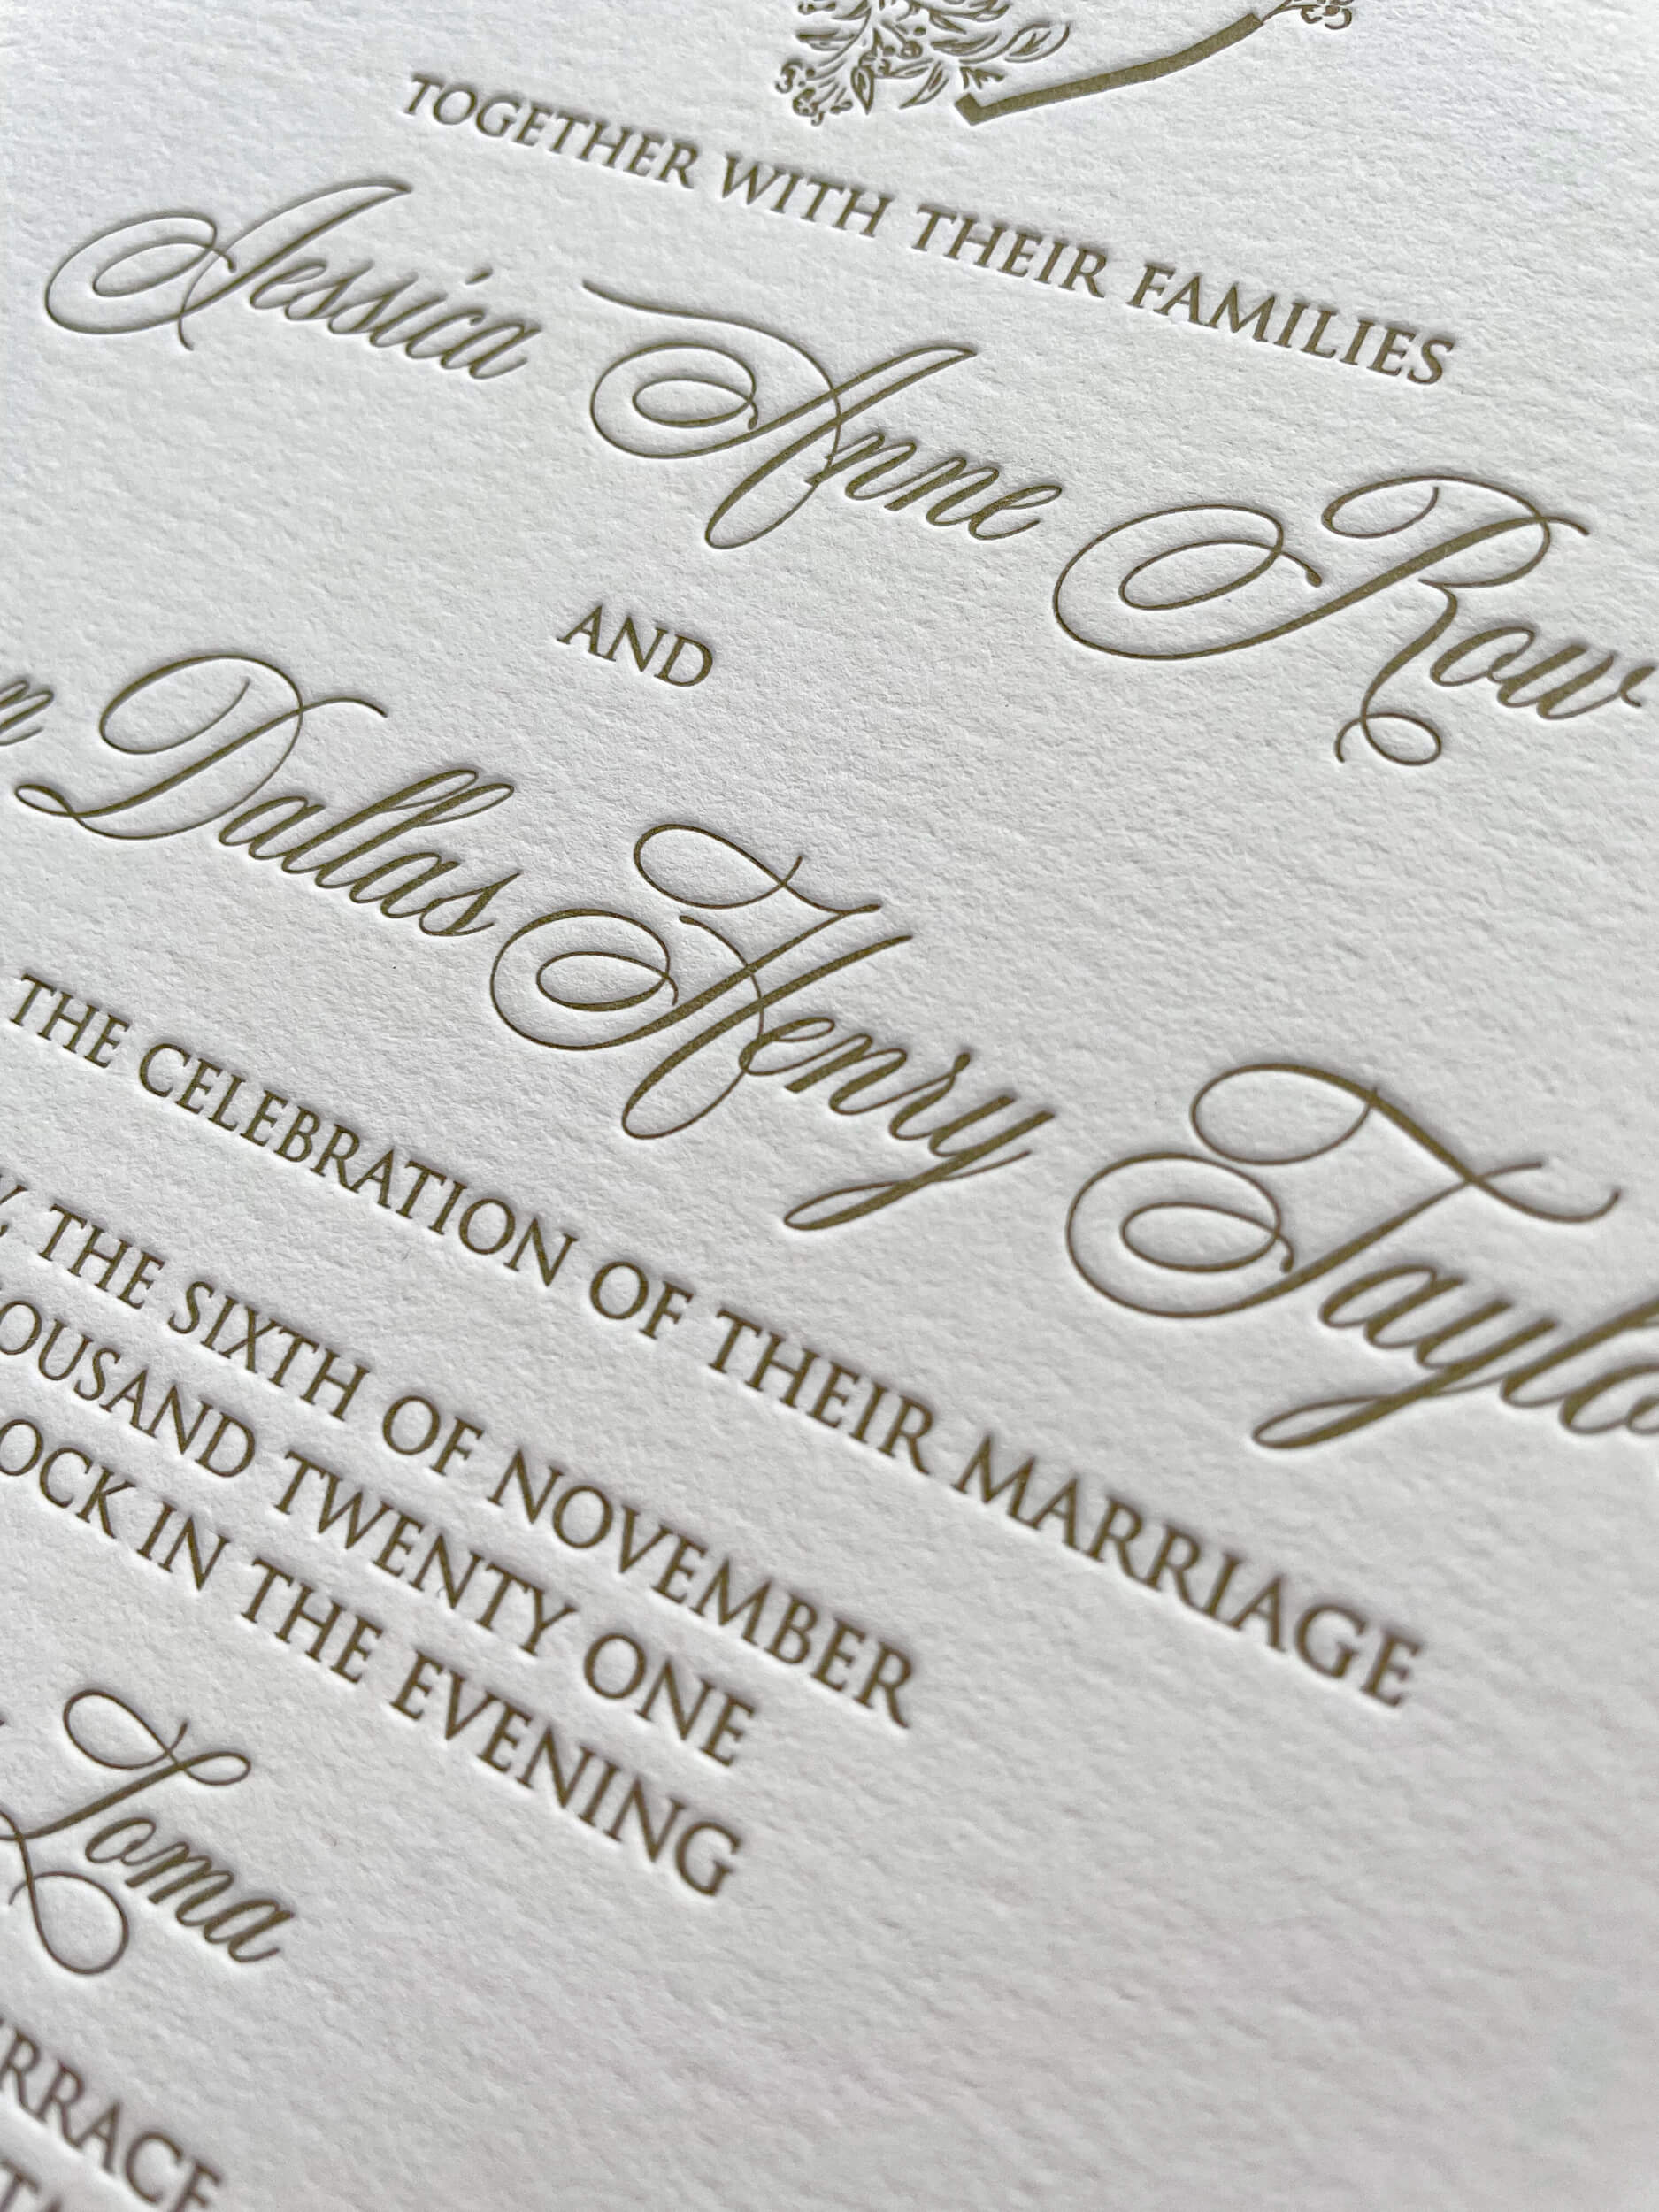 Letterpress invitation on cotton cardstock with gold text